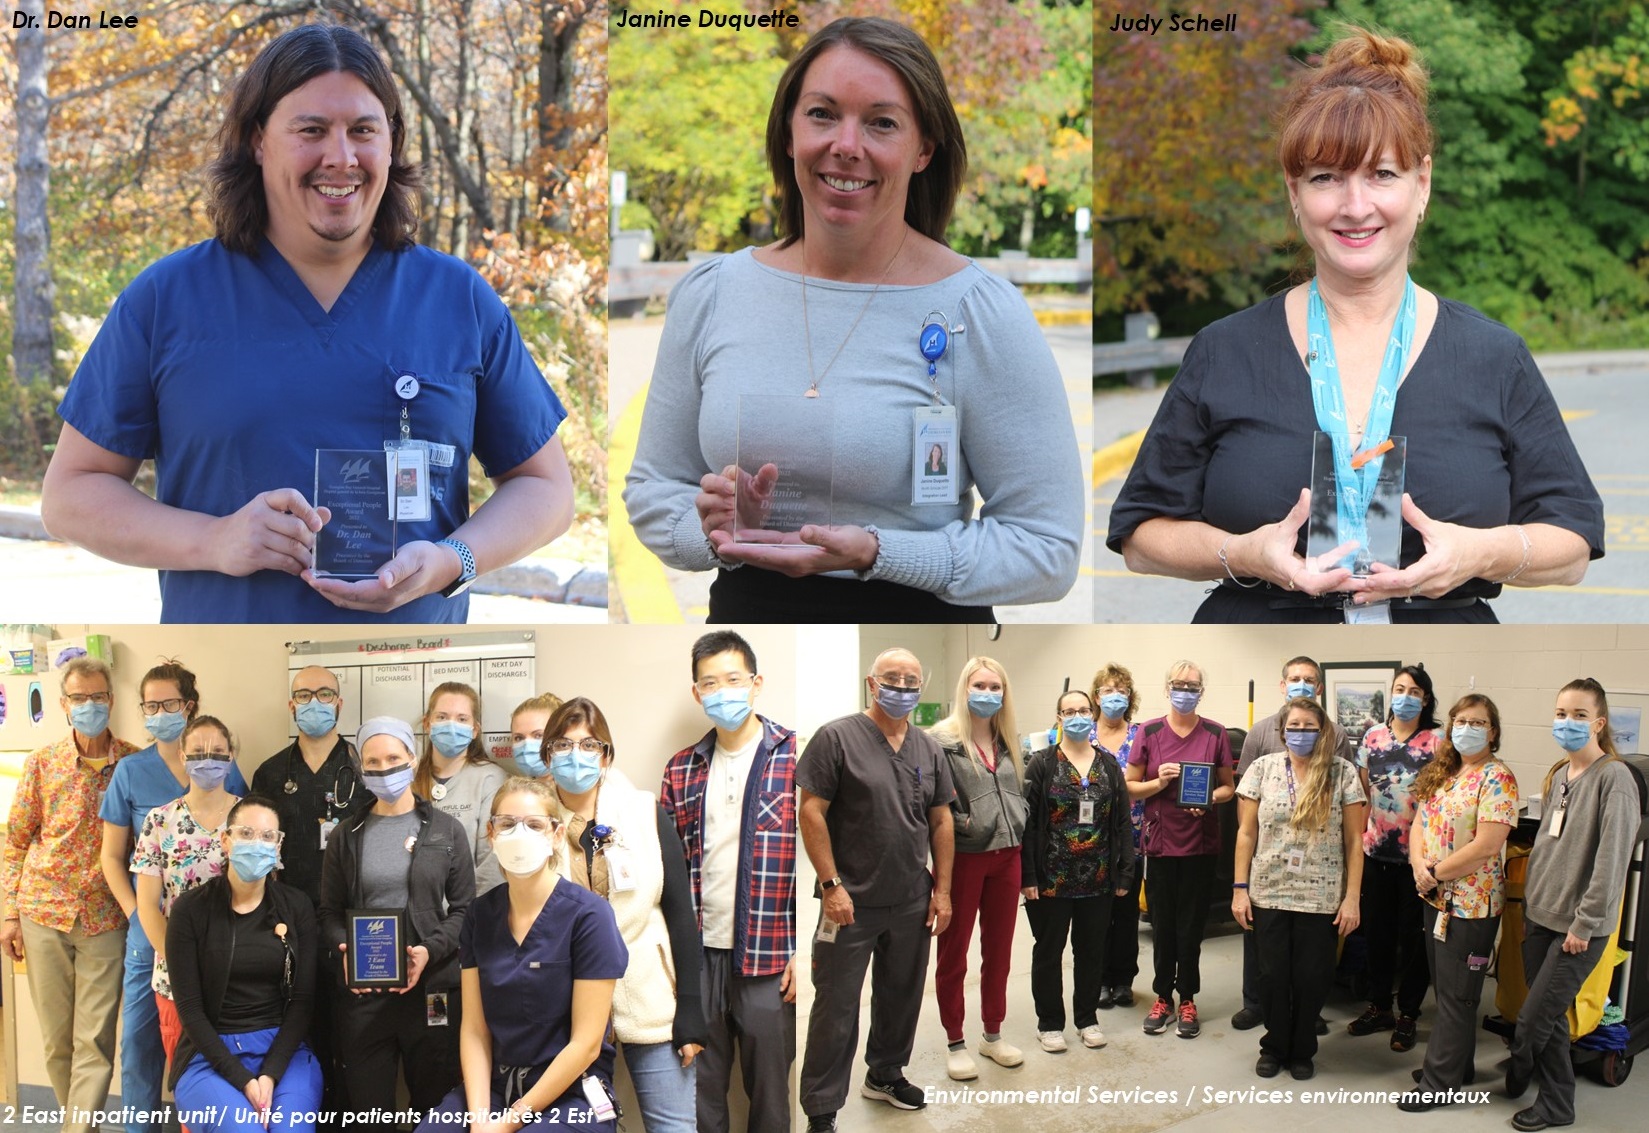 Board of Directors names GBGH team members as Exceptional People Award recipients